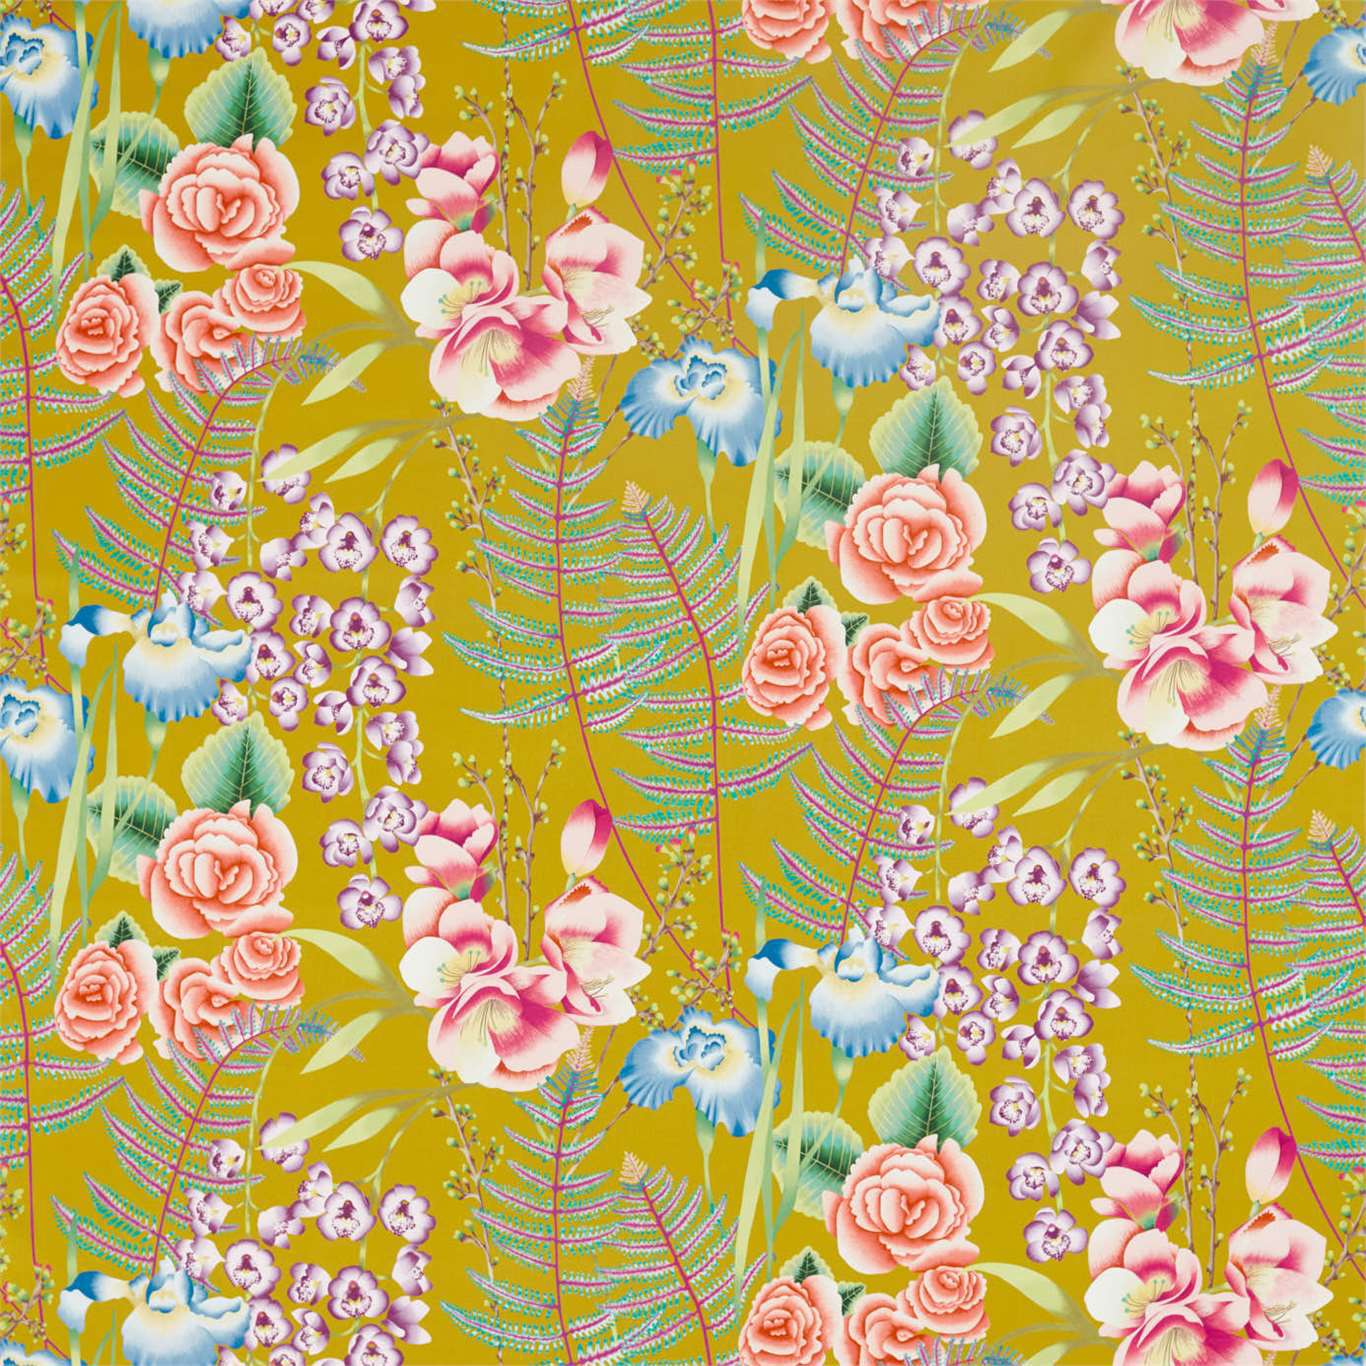 Amaryllis Fabric by Harlequin - HZAP120735 - Coral/Lagoon/Ochre